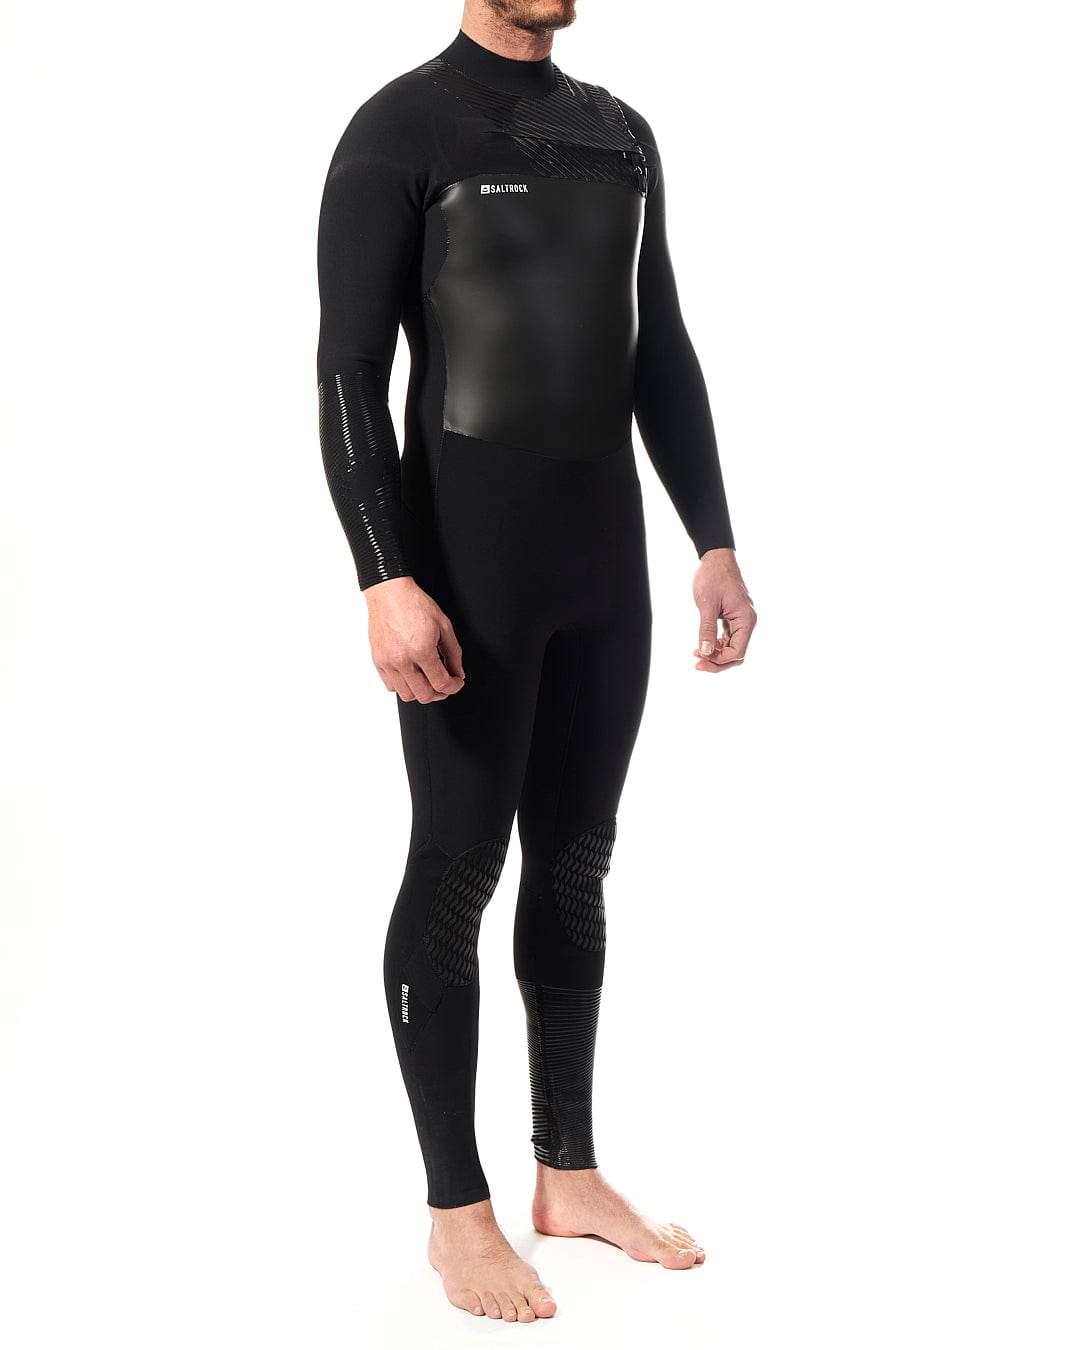 A man in a Saltrock Shockwave - Mens 3/2 Chest Zip Full Wetsuit - Black standing on a white background.